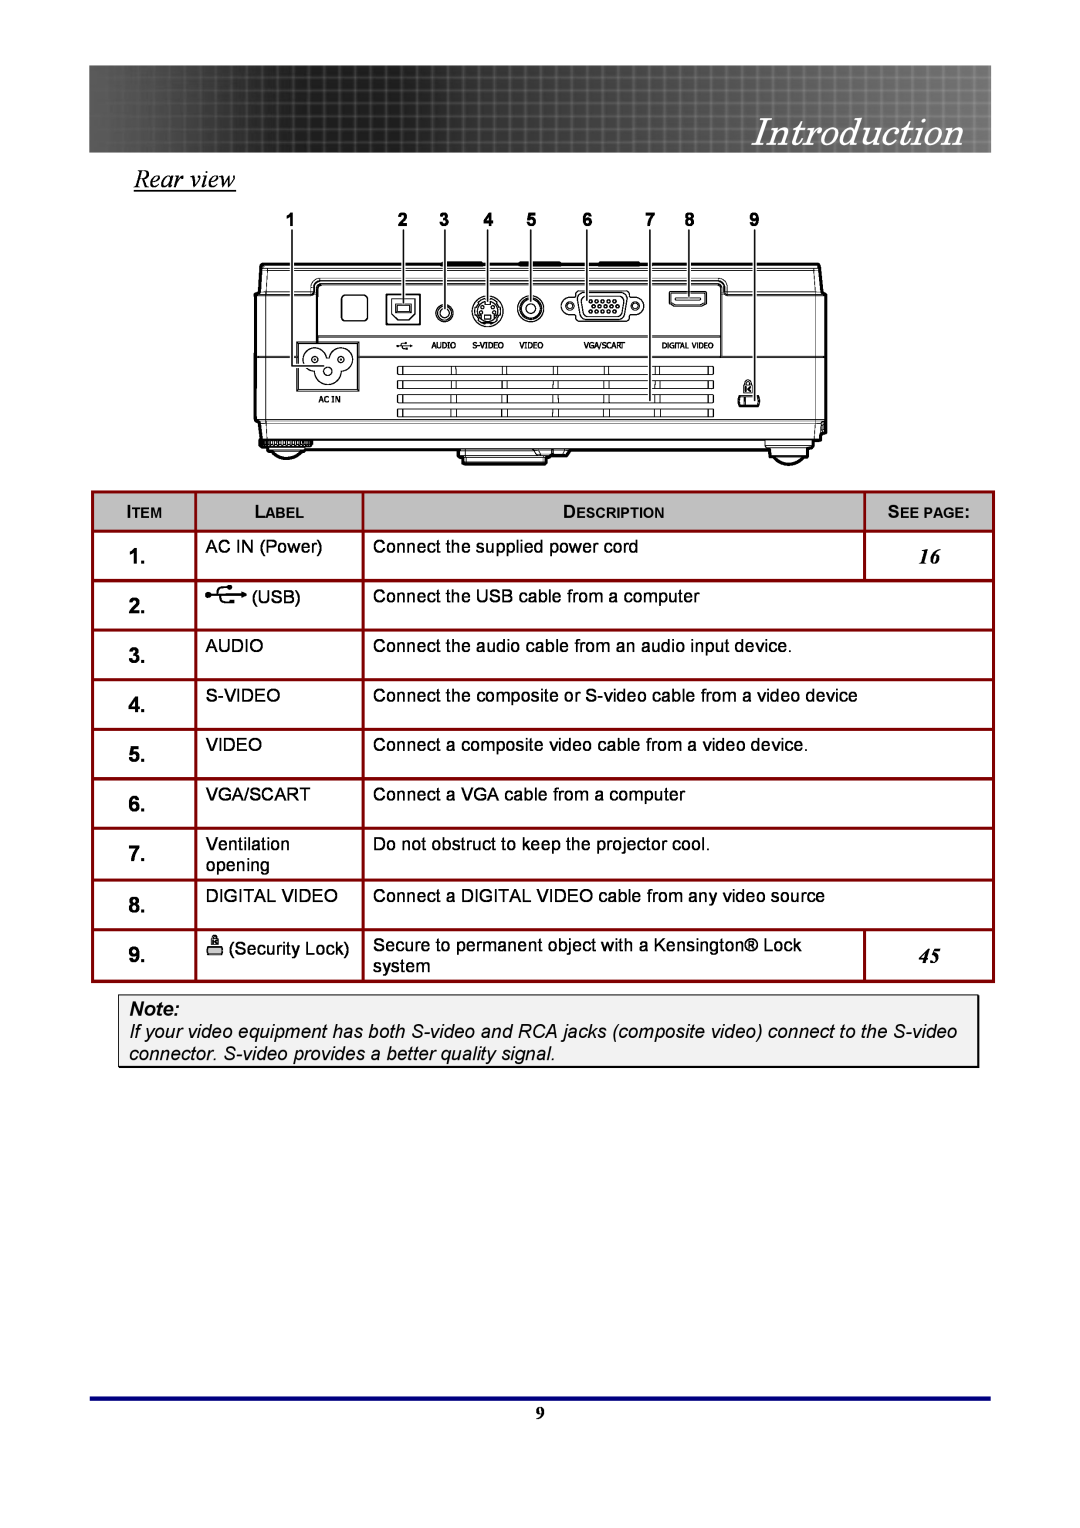 Optoma Technology EP7155 manual Rear view, Introduction 